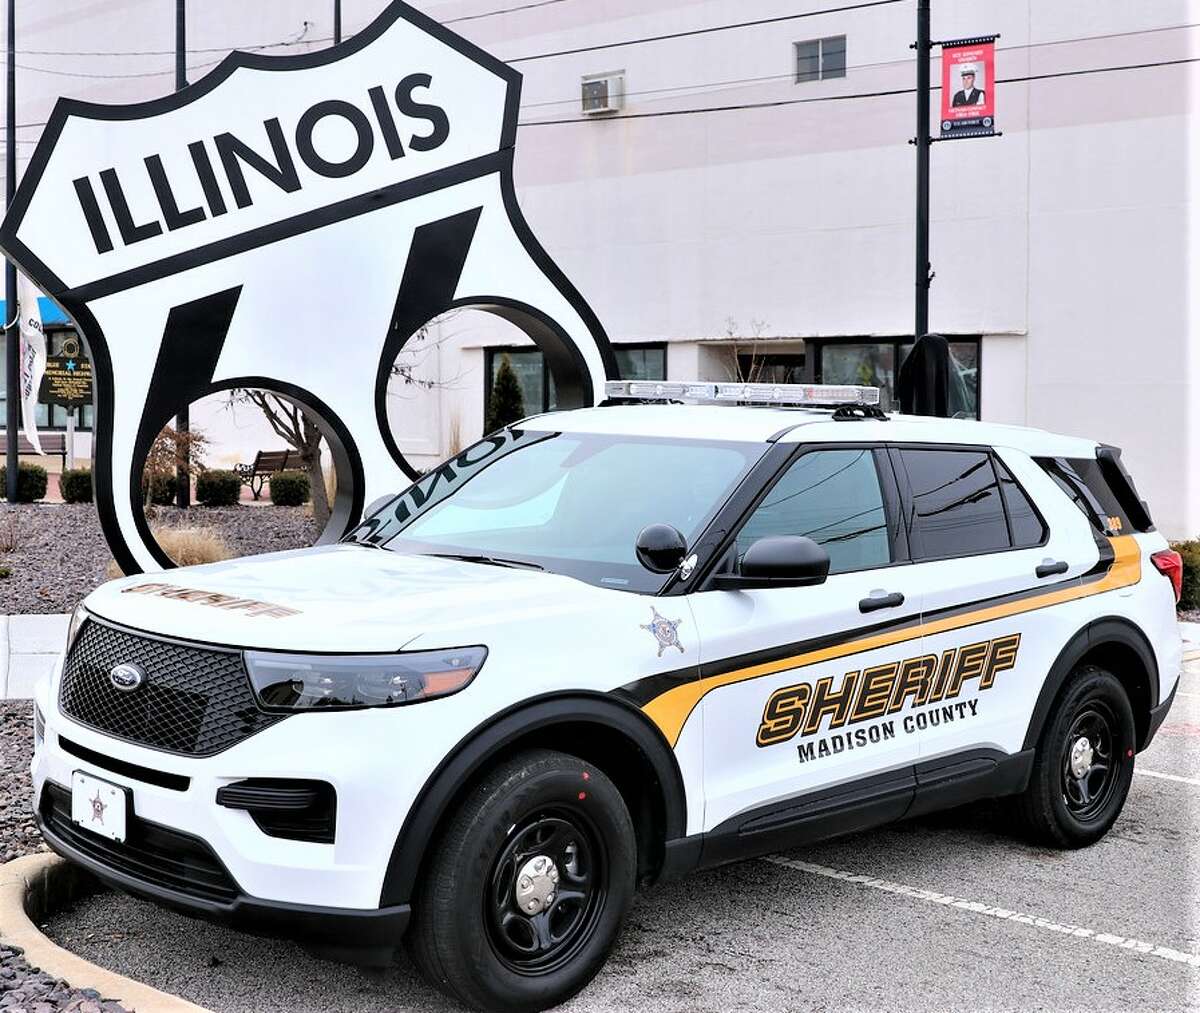 A new design for Madison County Sheriff's Department patrol vehicles was recently unveiled by Sheriff Jeff  Connor. Additionally, the department is looking at new uniforms.